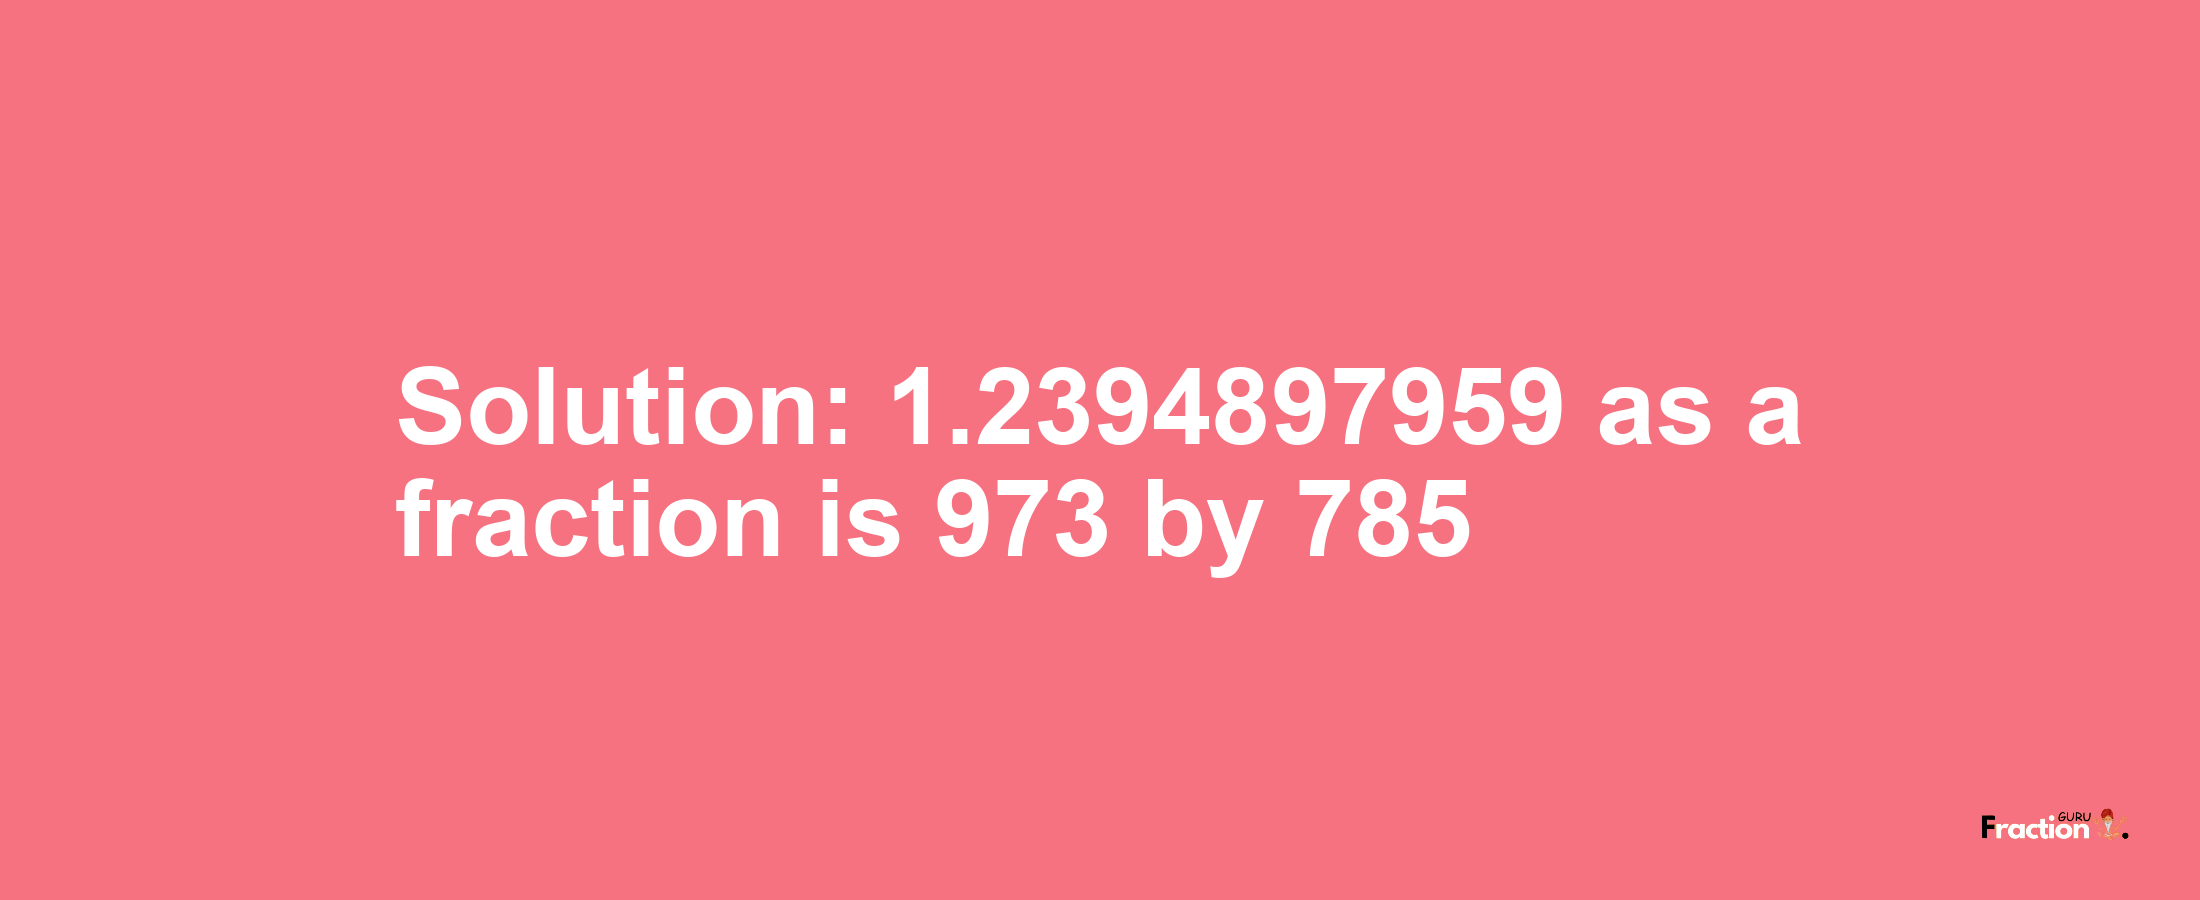 Solution:1.2394897959 as a fraction is 973/785